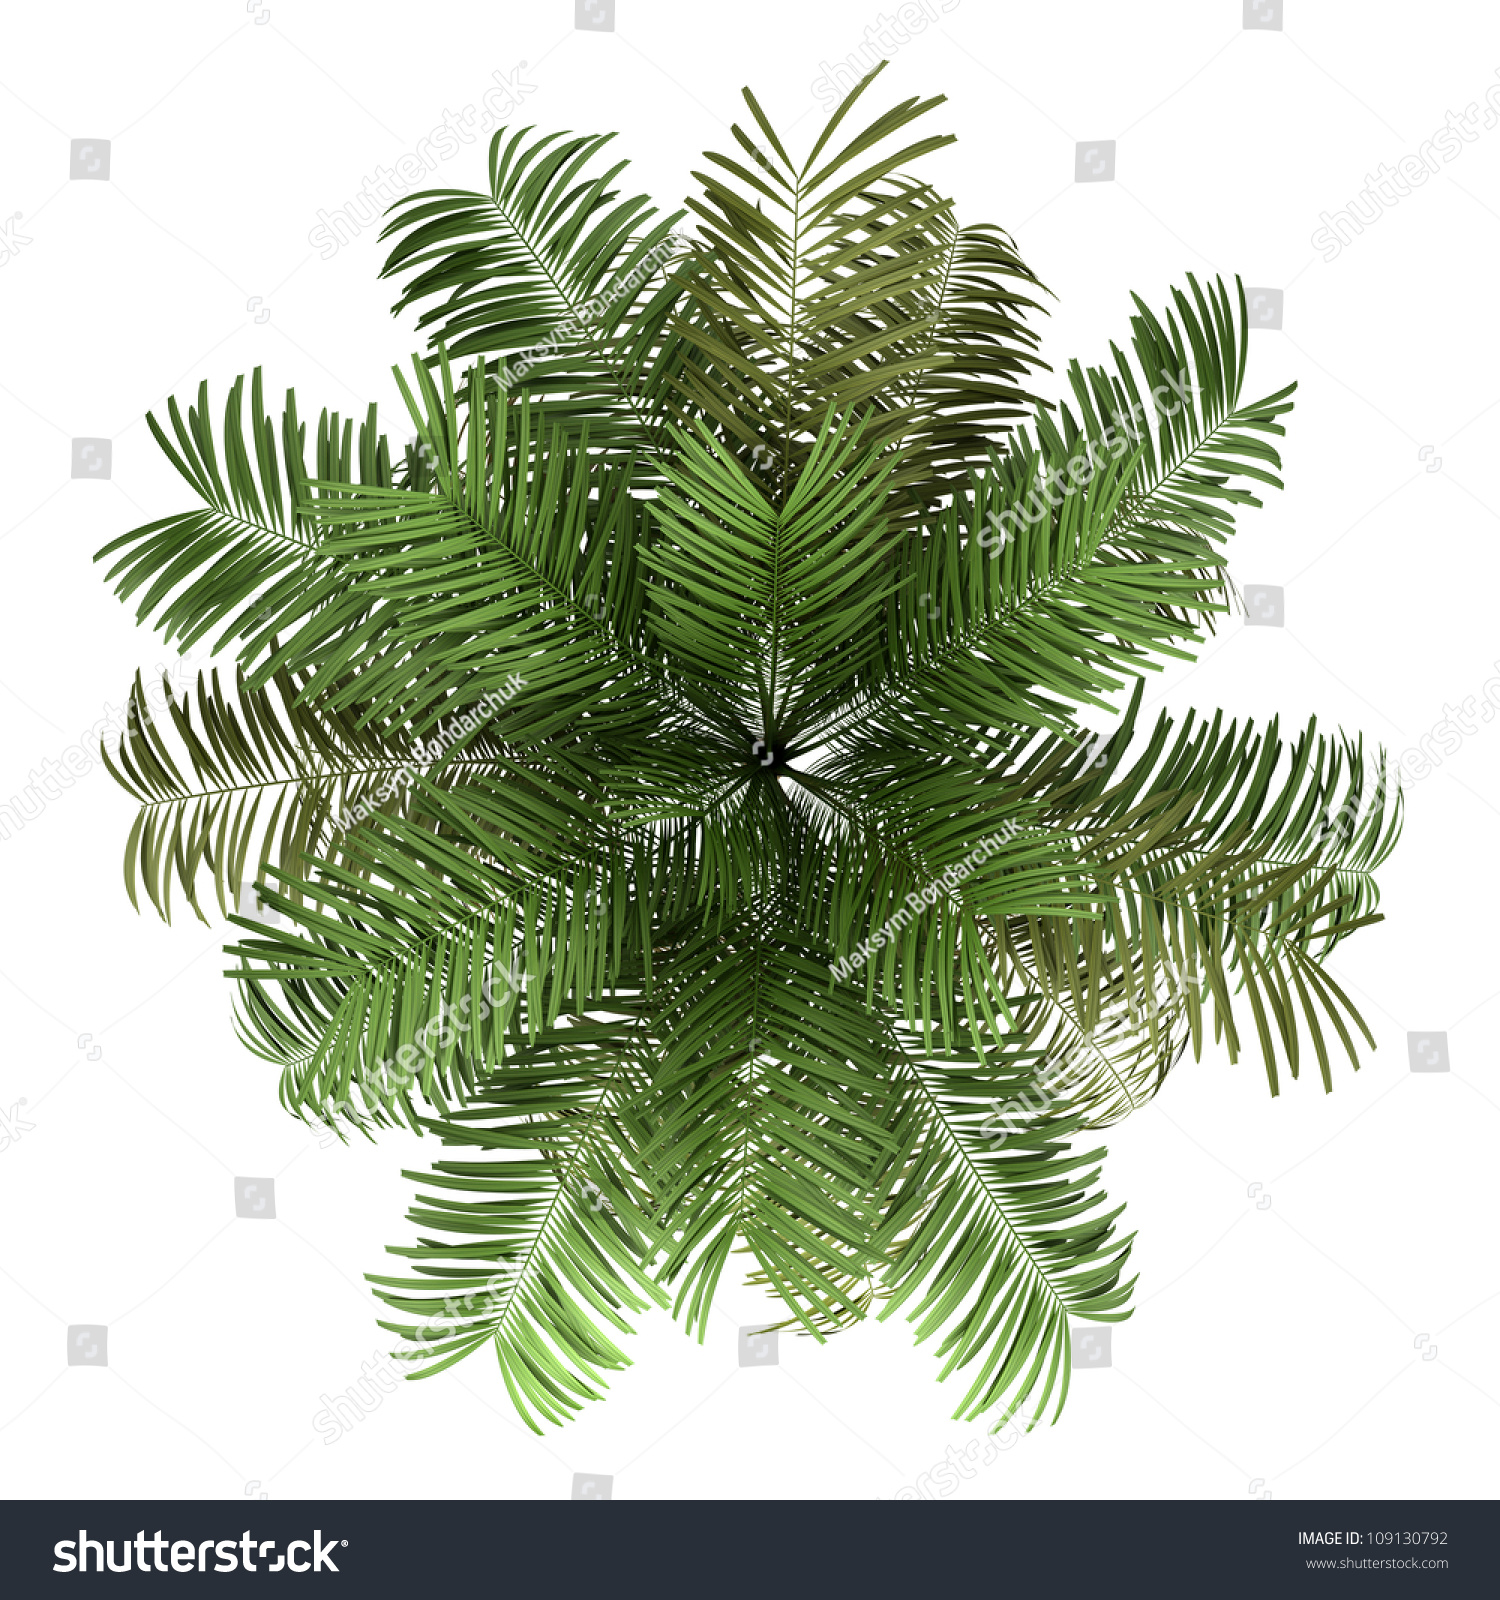 Stock Photo Top View Of Areca Palm Tree Isolated On White Background